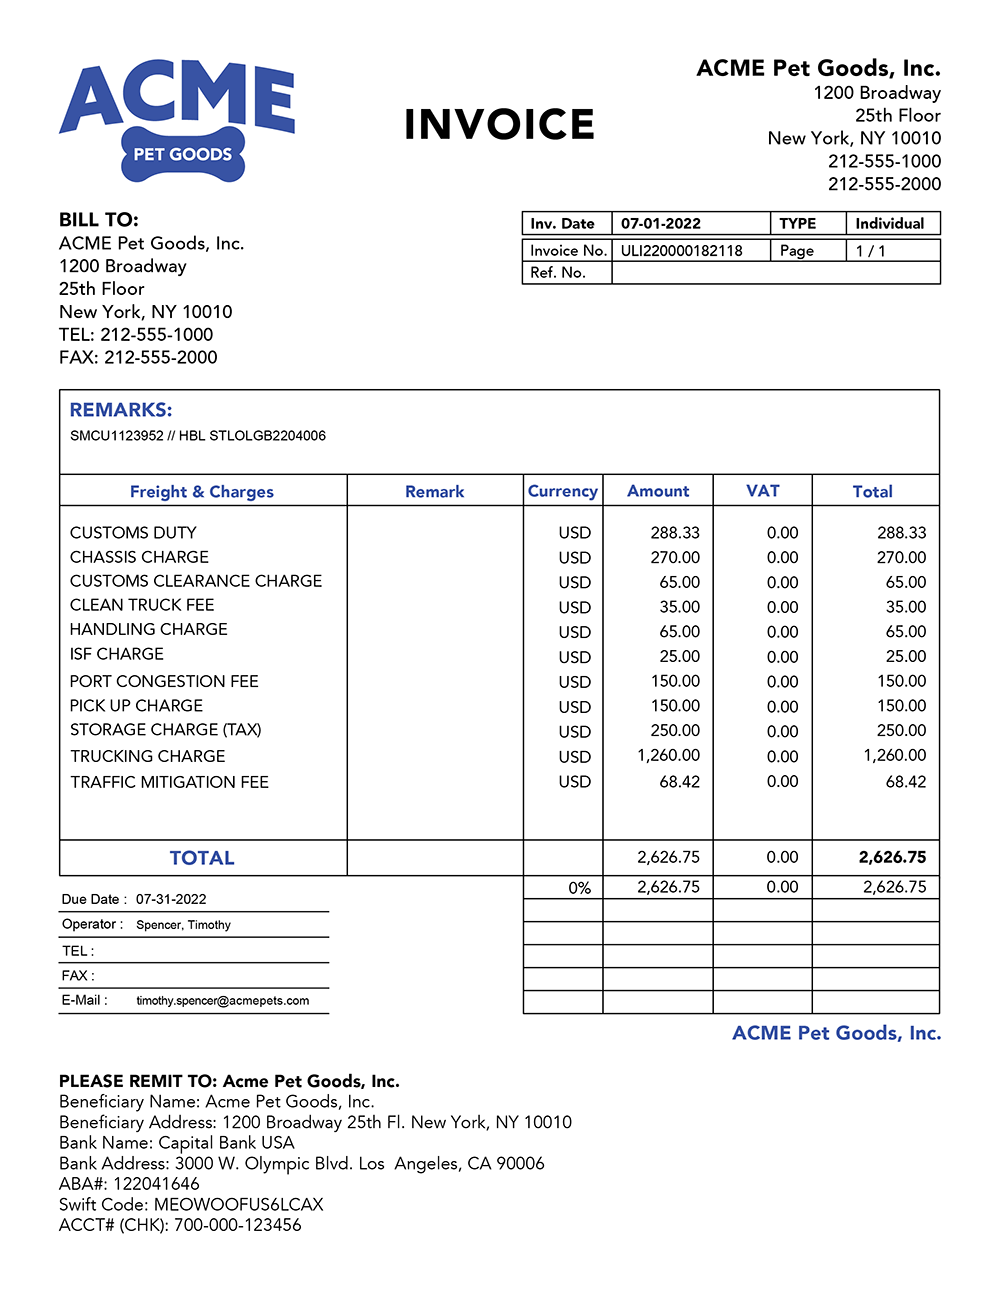 Example of a common Drayage and Transloading invoice with unexpected fees.